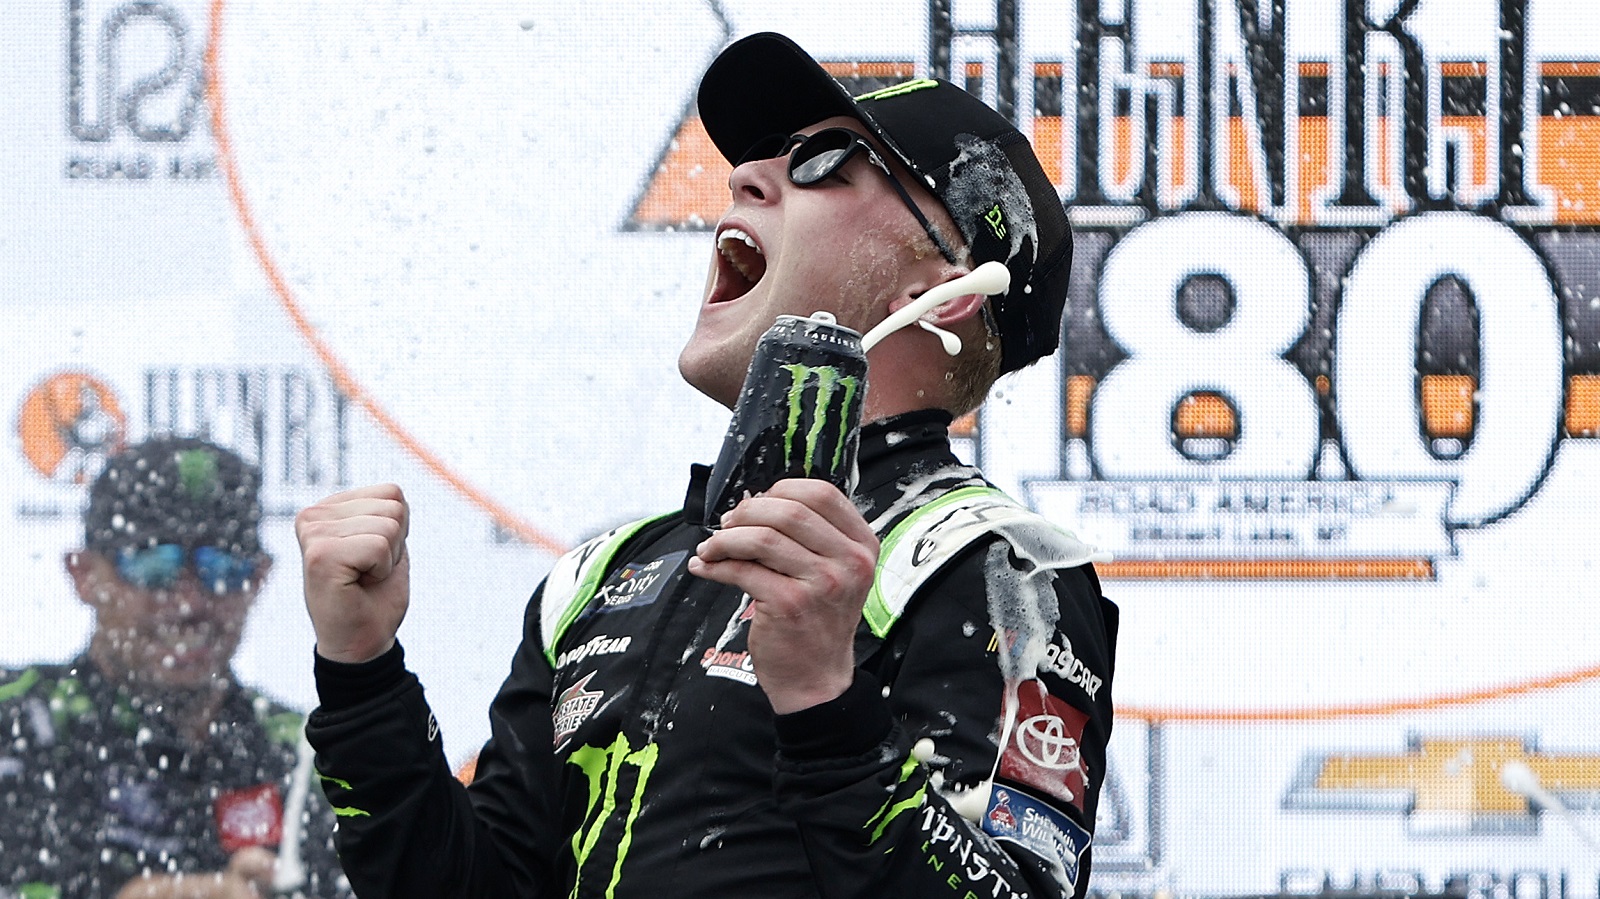 Ty Gibbs celebrates after winning the NASCAR Xfinity Series Henry 180 at Road America on July 2, 2022. | Sean Gardner/Getty Images